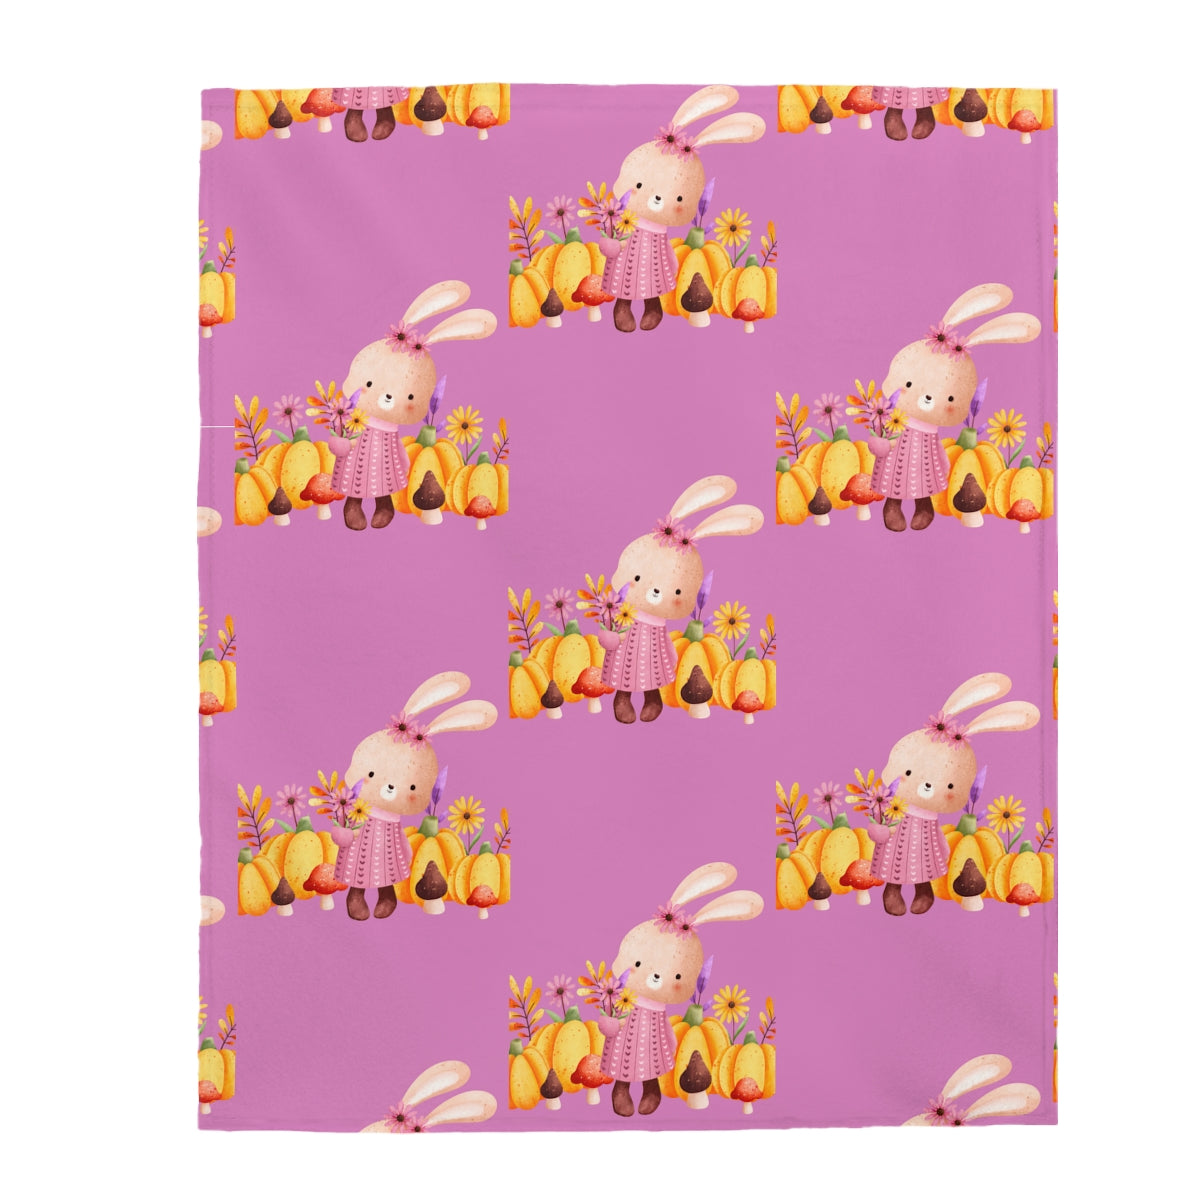 BABY BLANKET BUNNY AND PUMPKINS, PLUSH BLANKET SUPER SOFT THROW FOR KIDS, TEENS, ADULTS, 3 SIZES | ARTZIRA